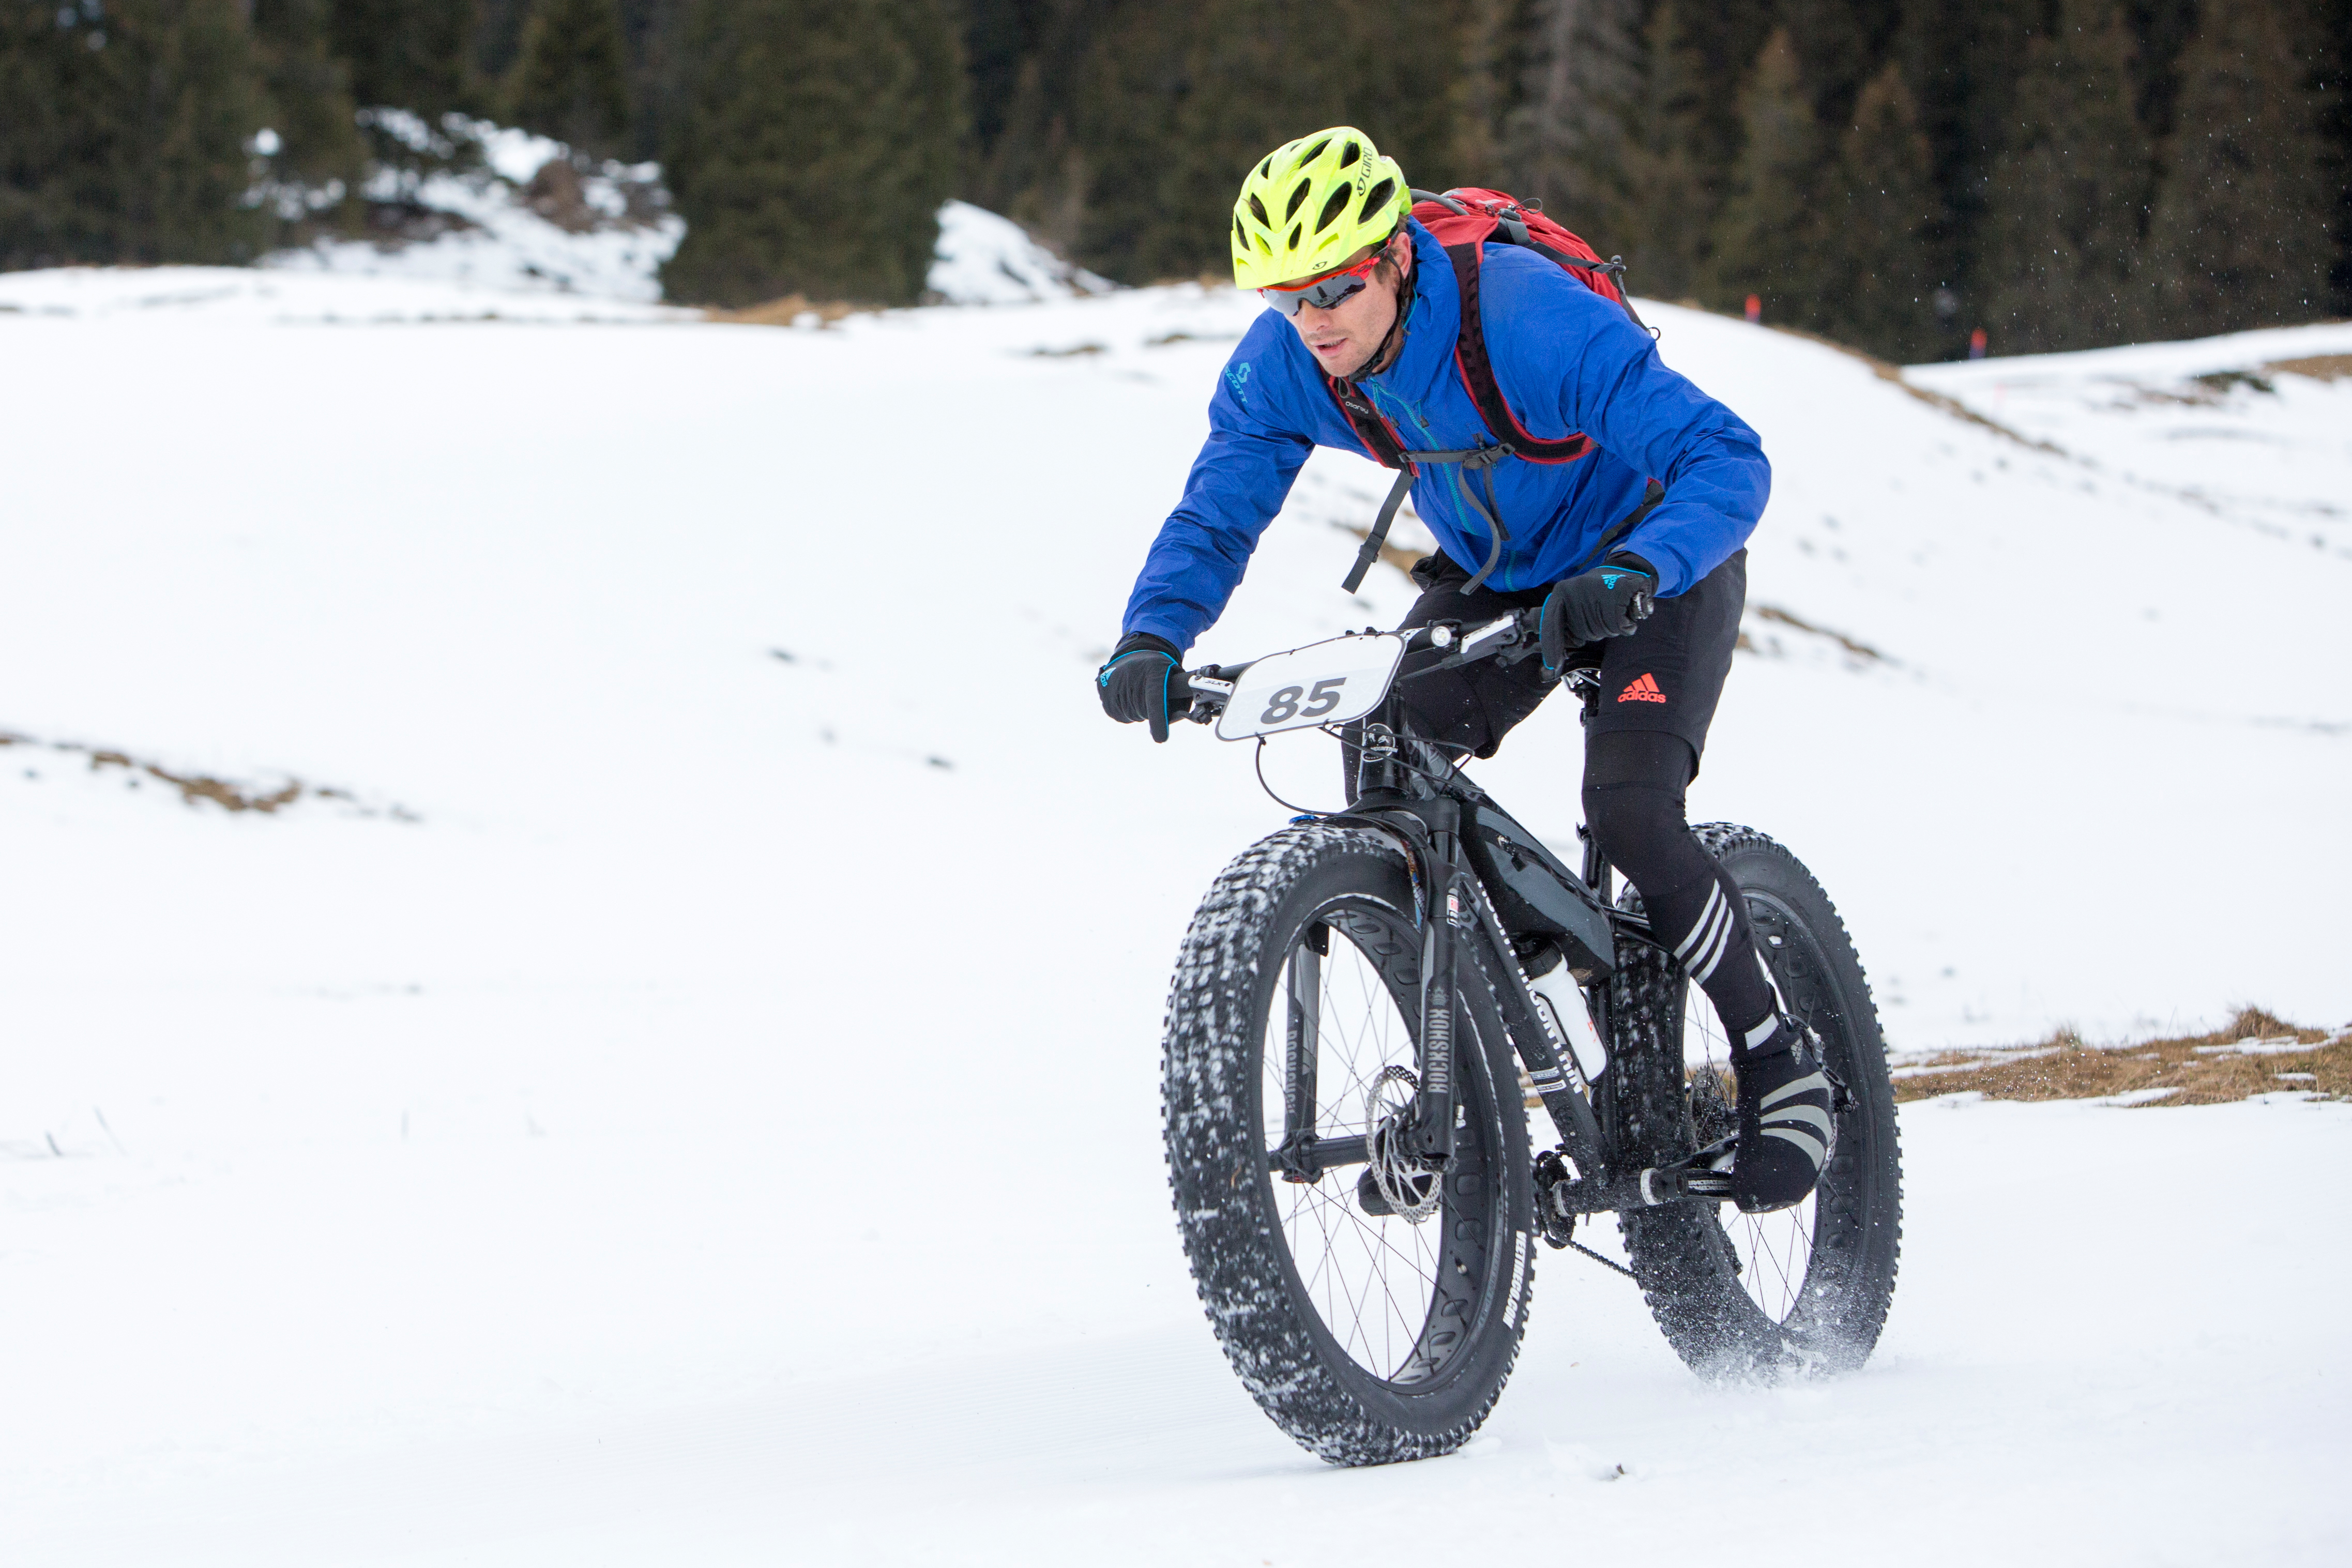 Visit the Snow Bike Festival in Gstaad in January